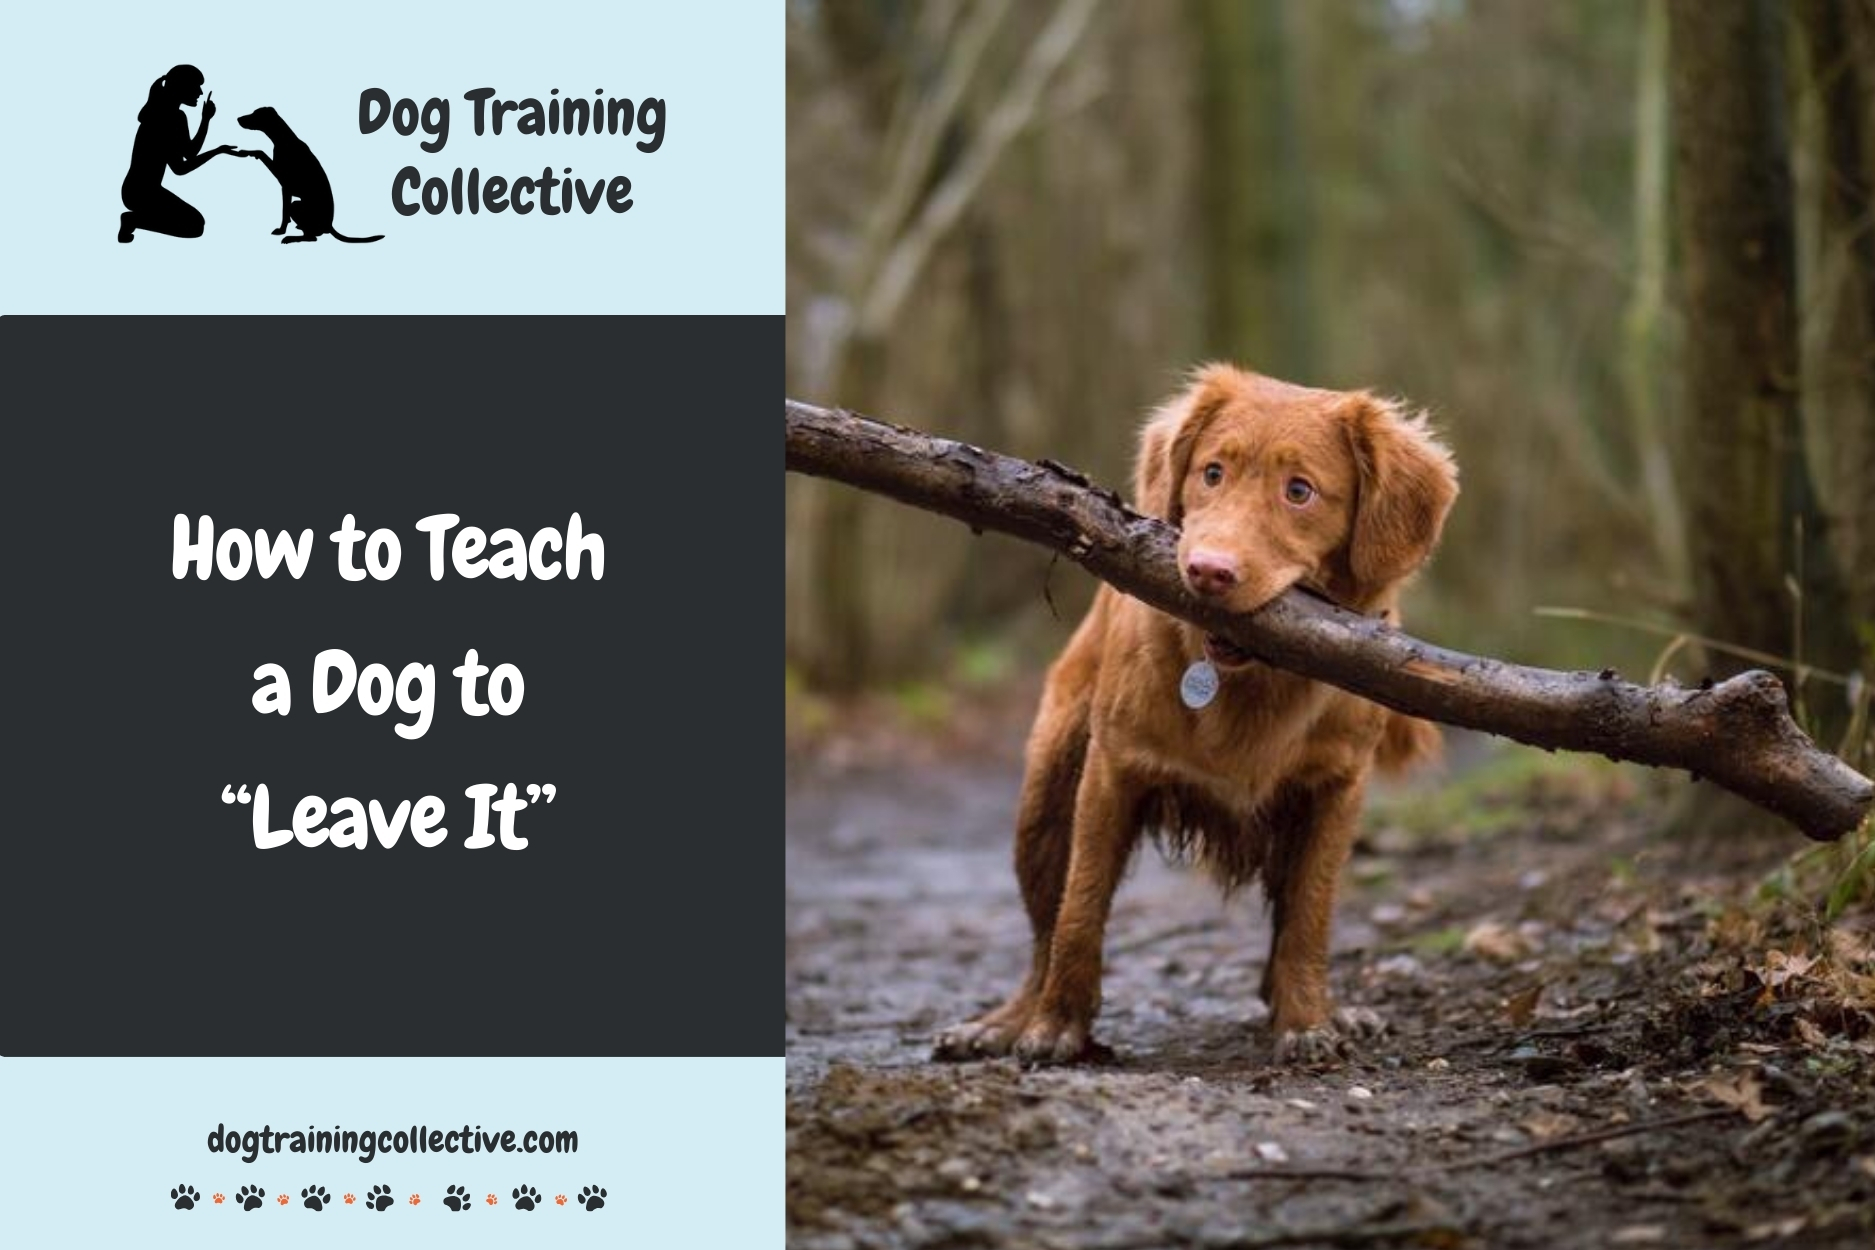 How to Teach a Dog to “Leave It”